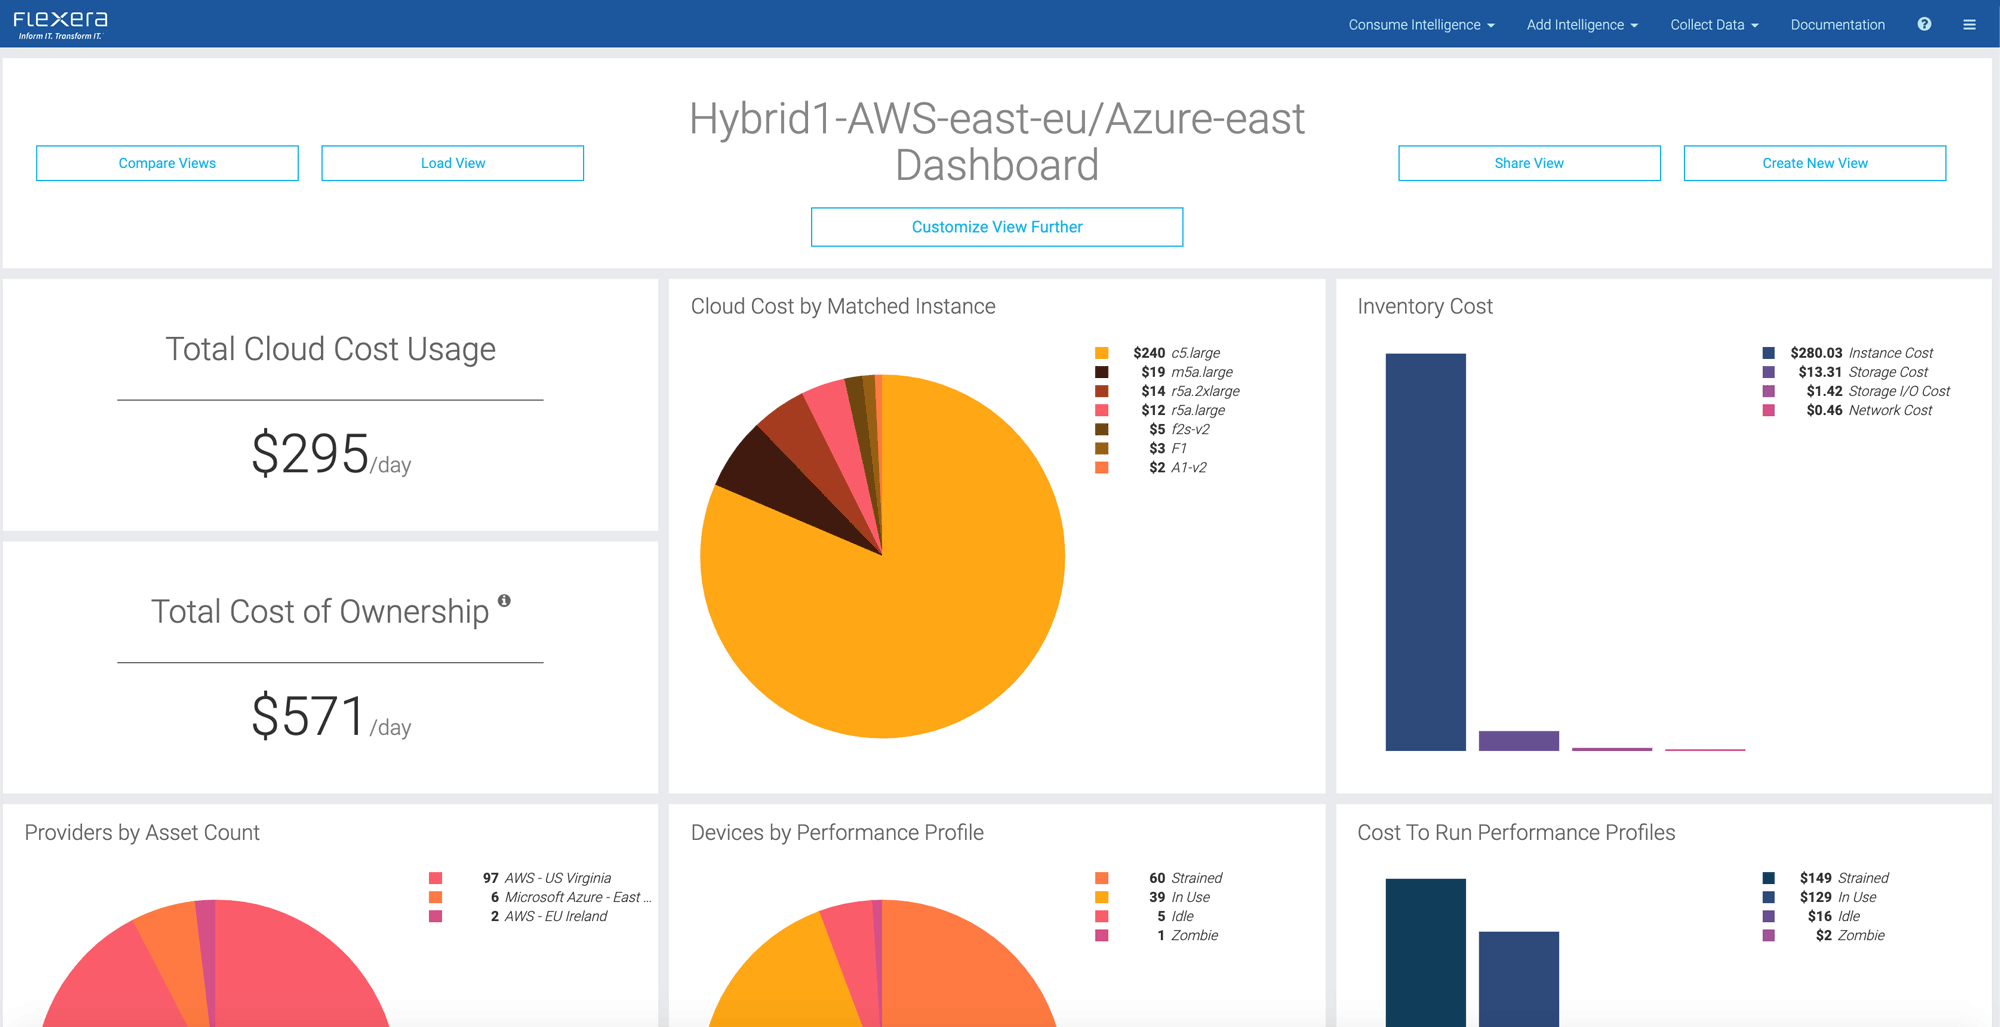 Software dashboard with bar and pie graphs displaying data on cloud cost ownership and usage